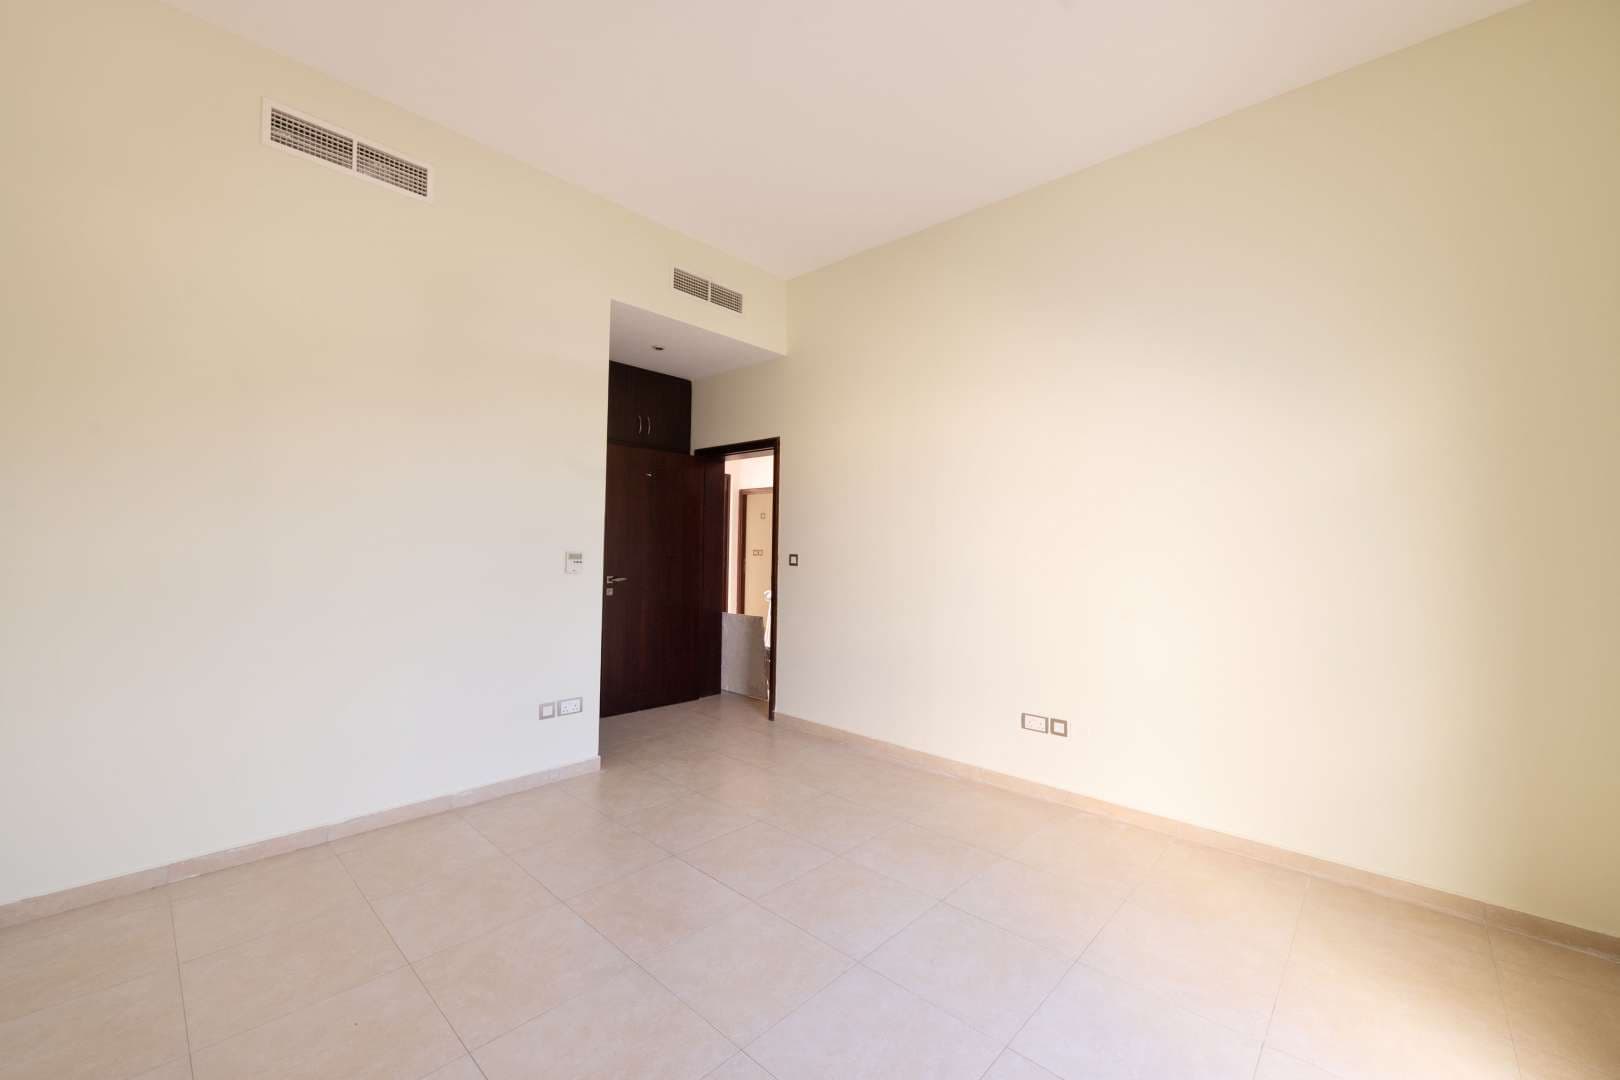 4 Bedroom Townhouse For Sale Naseem Lp08434 9a3135bc671f800.jpg